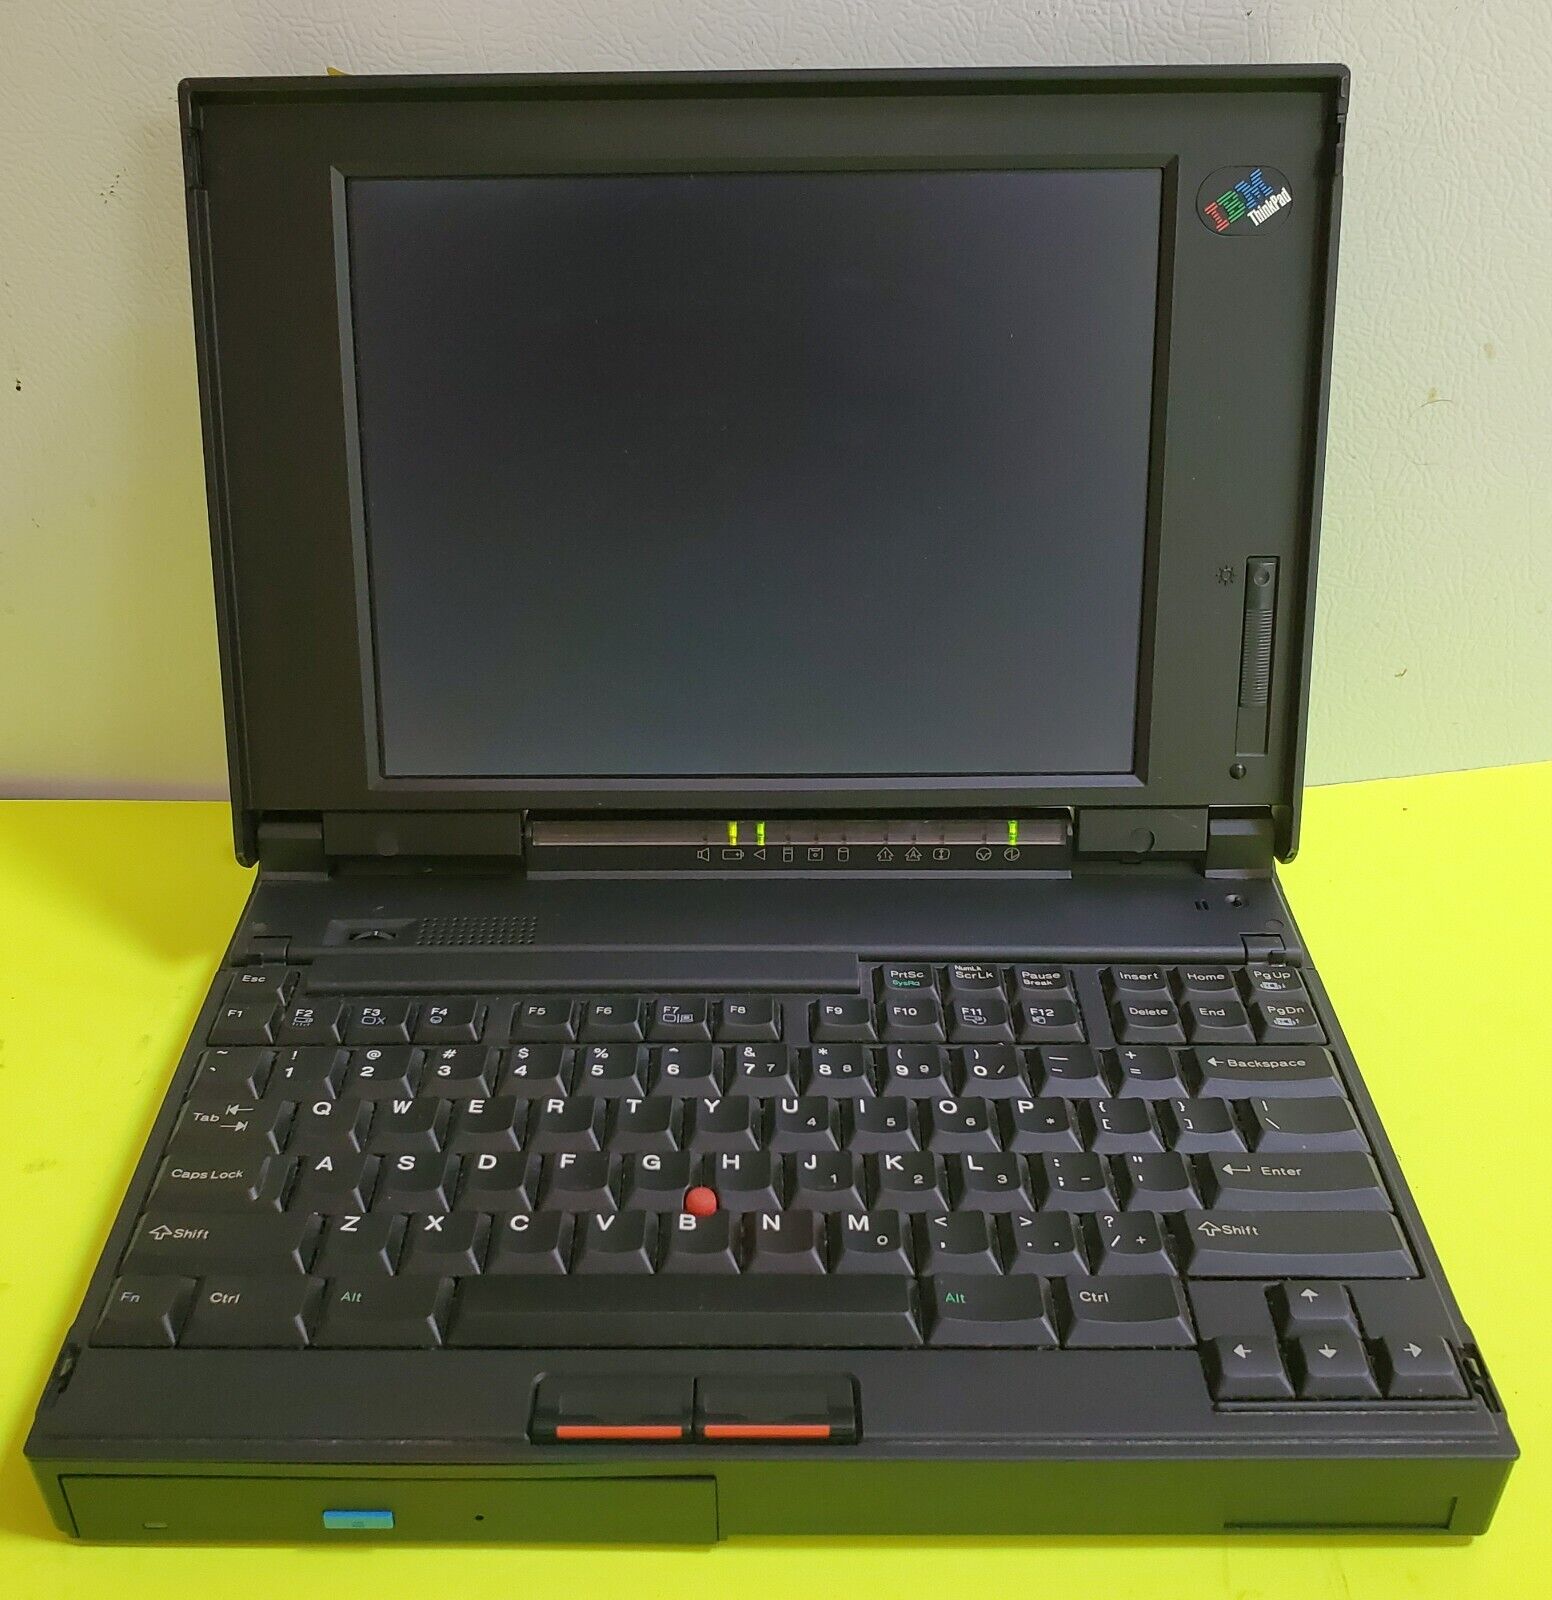 Vintage IBM Thinkpad 365 Type 2625 Retro Notebook Laptop Computer - AS IS. Available Now for 85.00